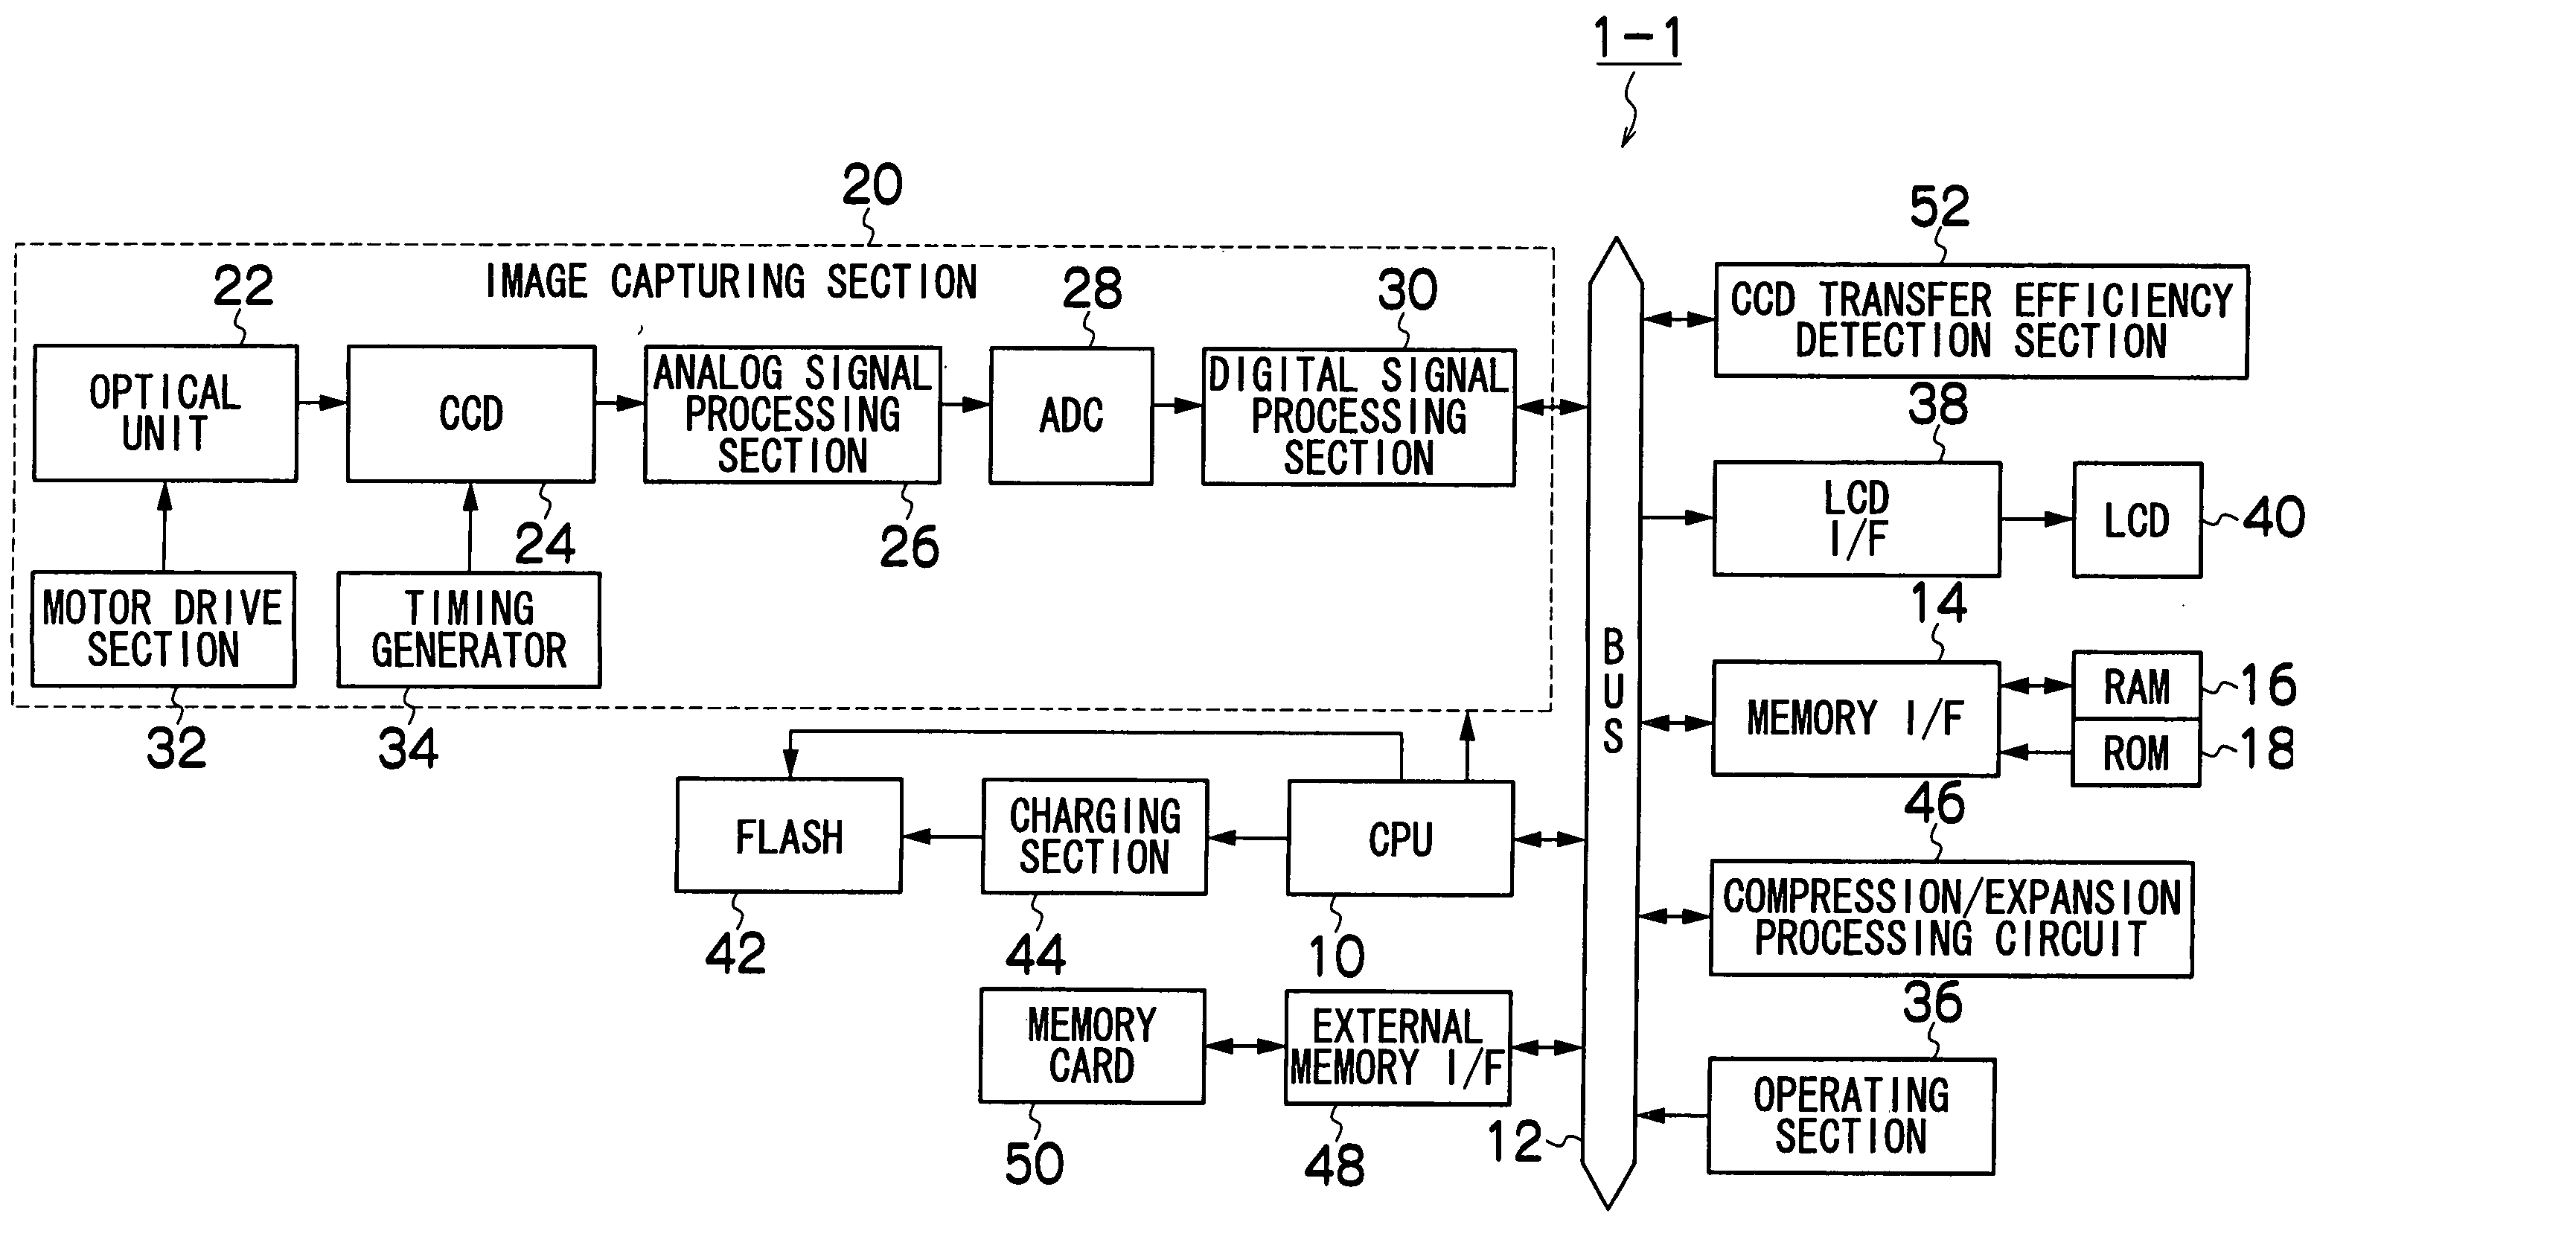 Signal processing method for image capturing apparatus, and image capturing apparatus